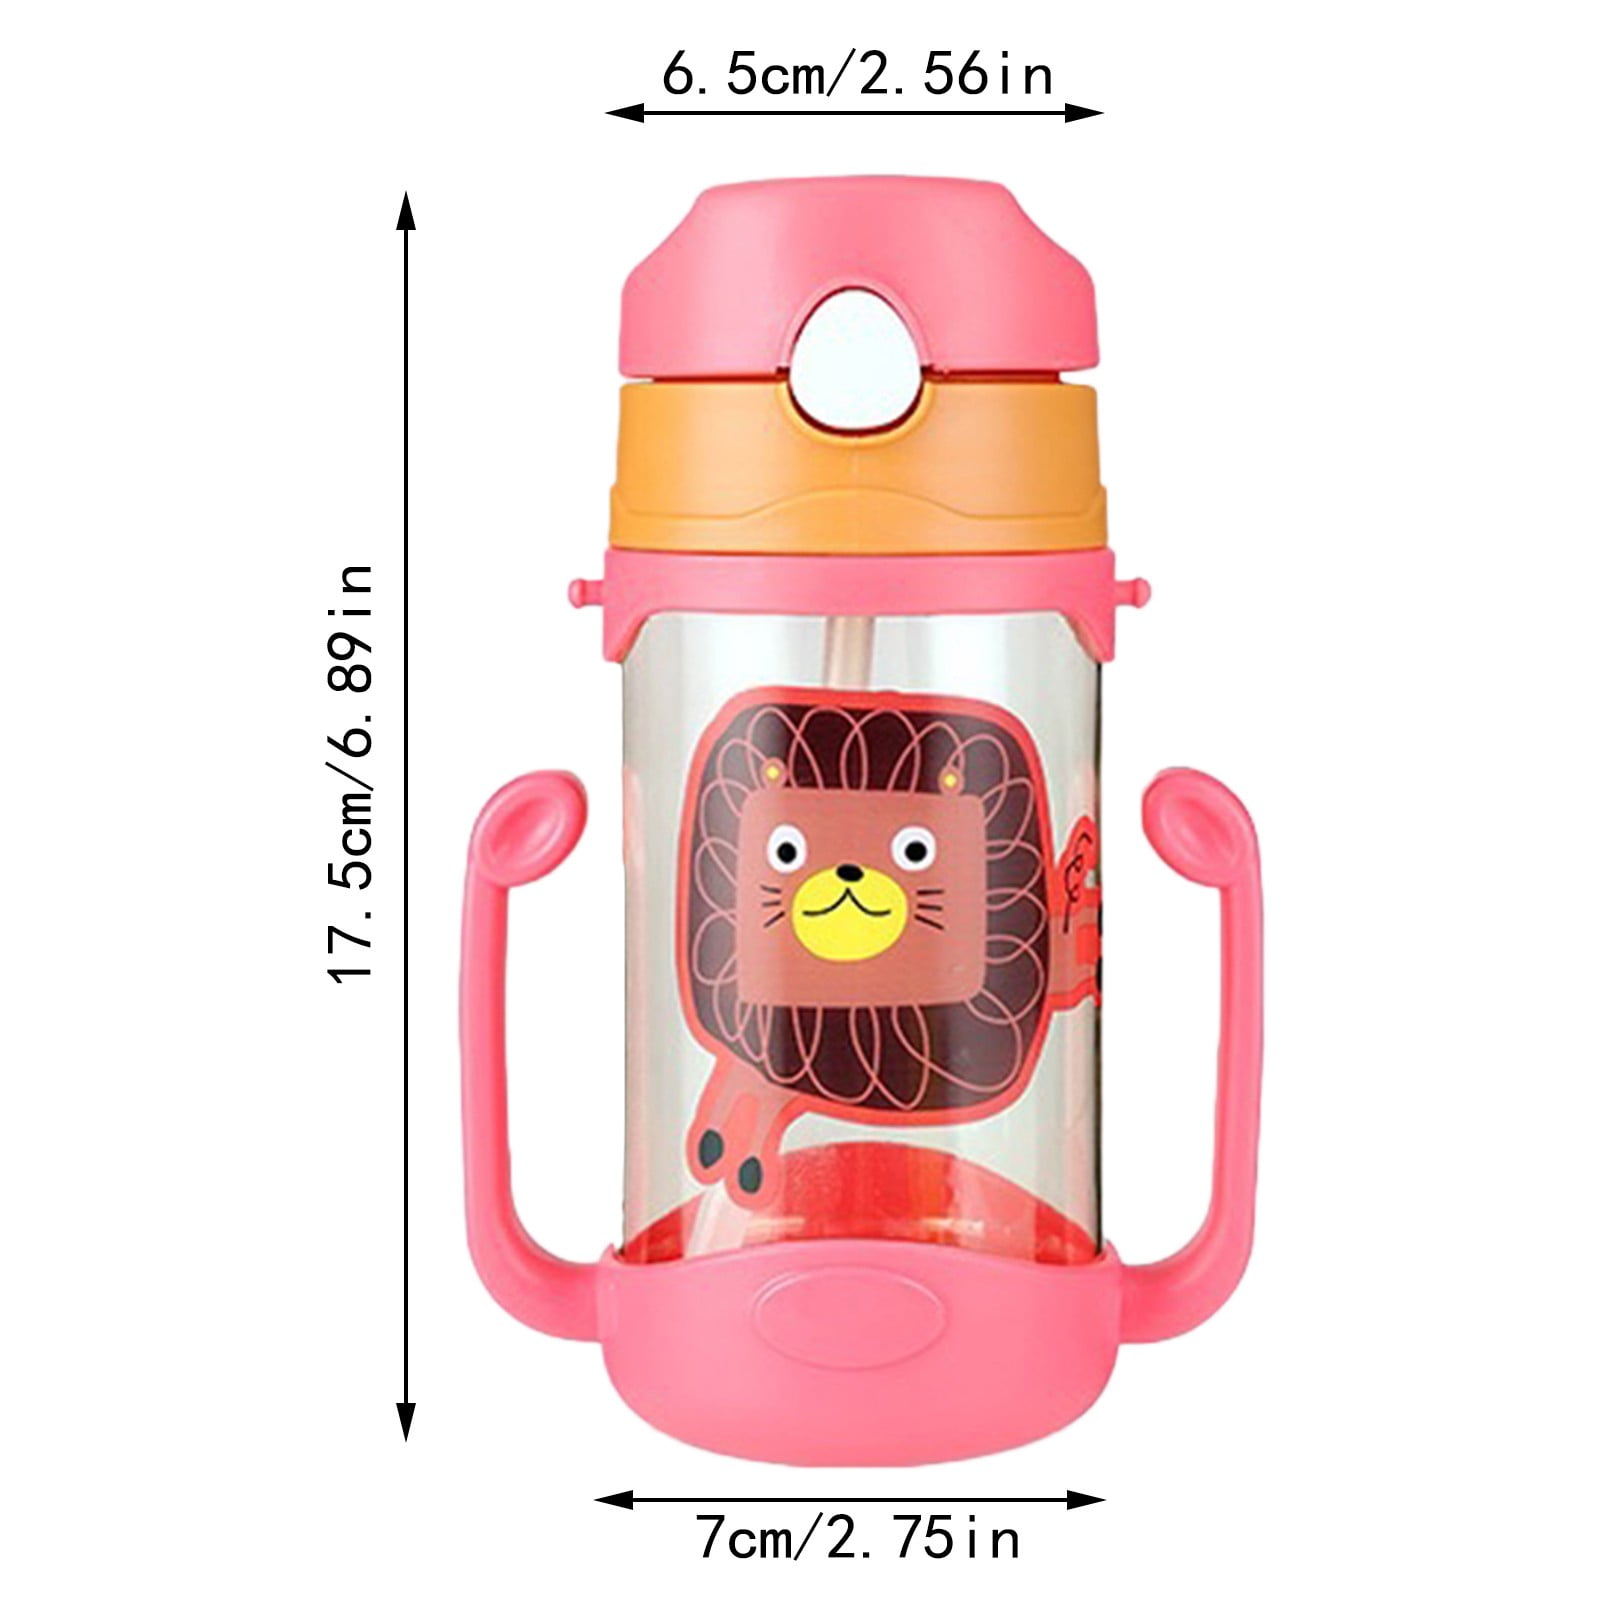 1pc 480ml yellow Kids Water Bottle For School Boys Girls, Cup With Straw,  Cute Cartoon Leak-proof Mug, Portable Travel Drinking Tumbler,Baby feeding  cup,sippy cup